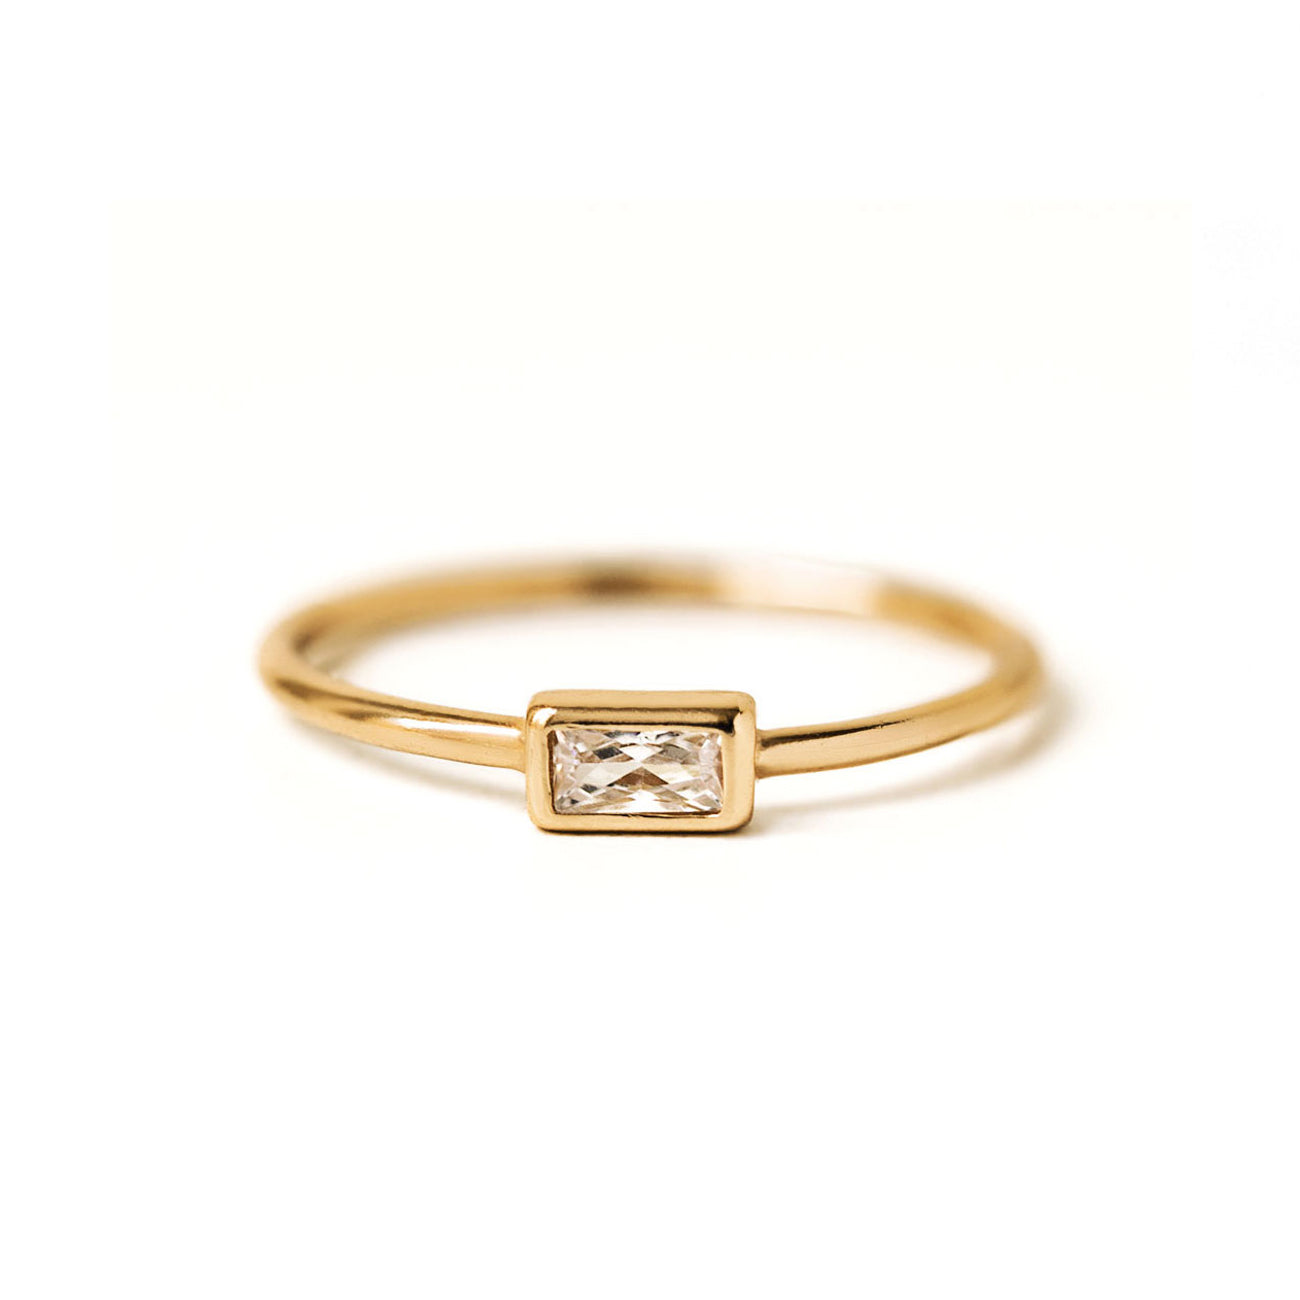 Tiny Gold Baguette Ring